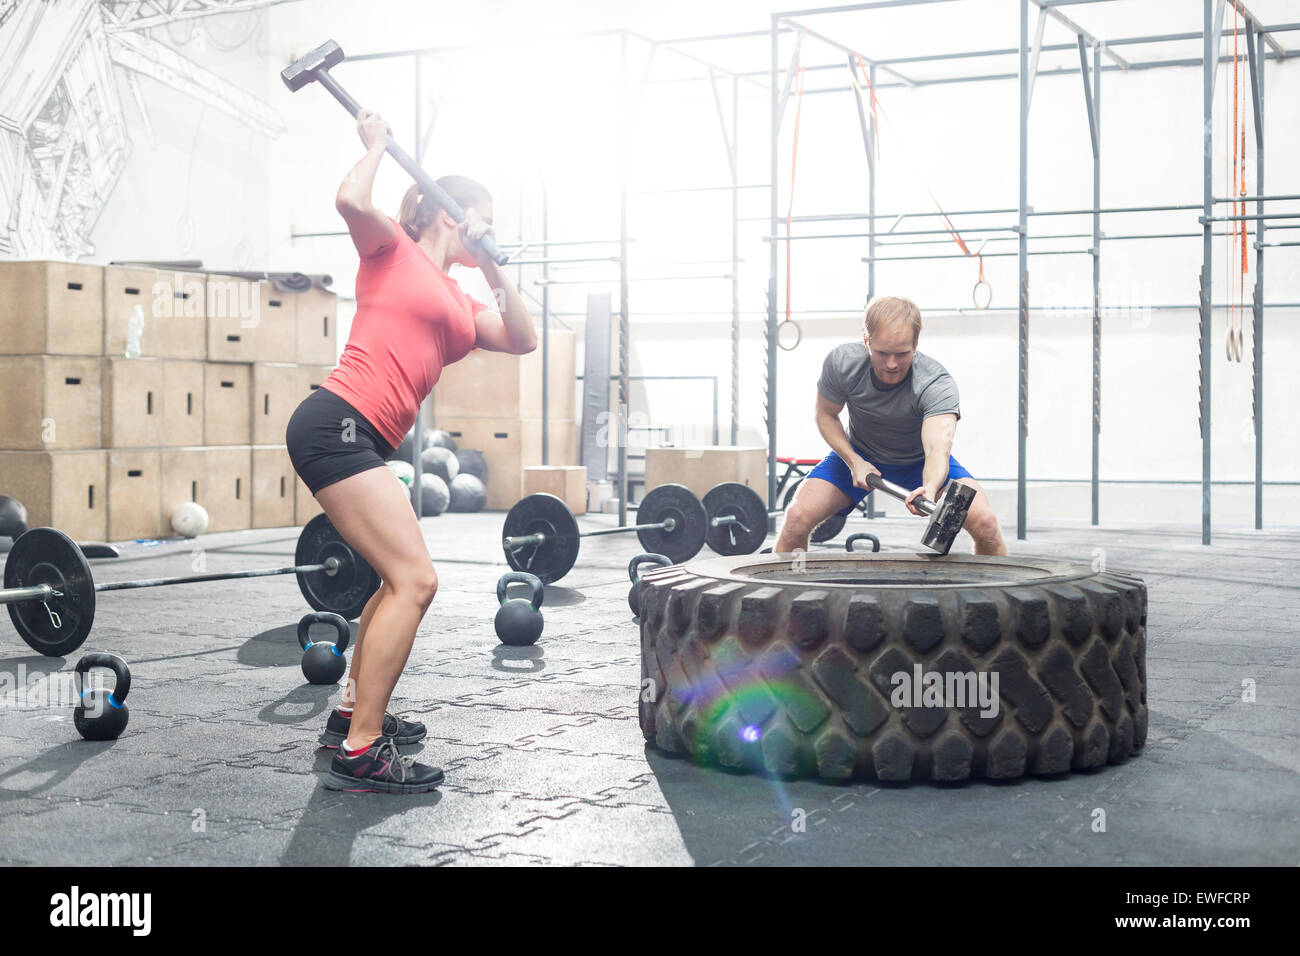 Dedicated man and woman hitting tire with sledgehammer in crossfit gym Stock Photo